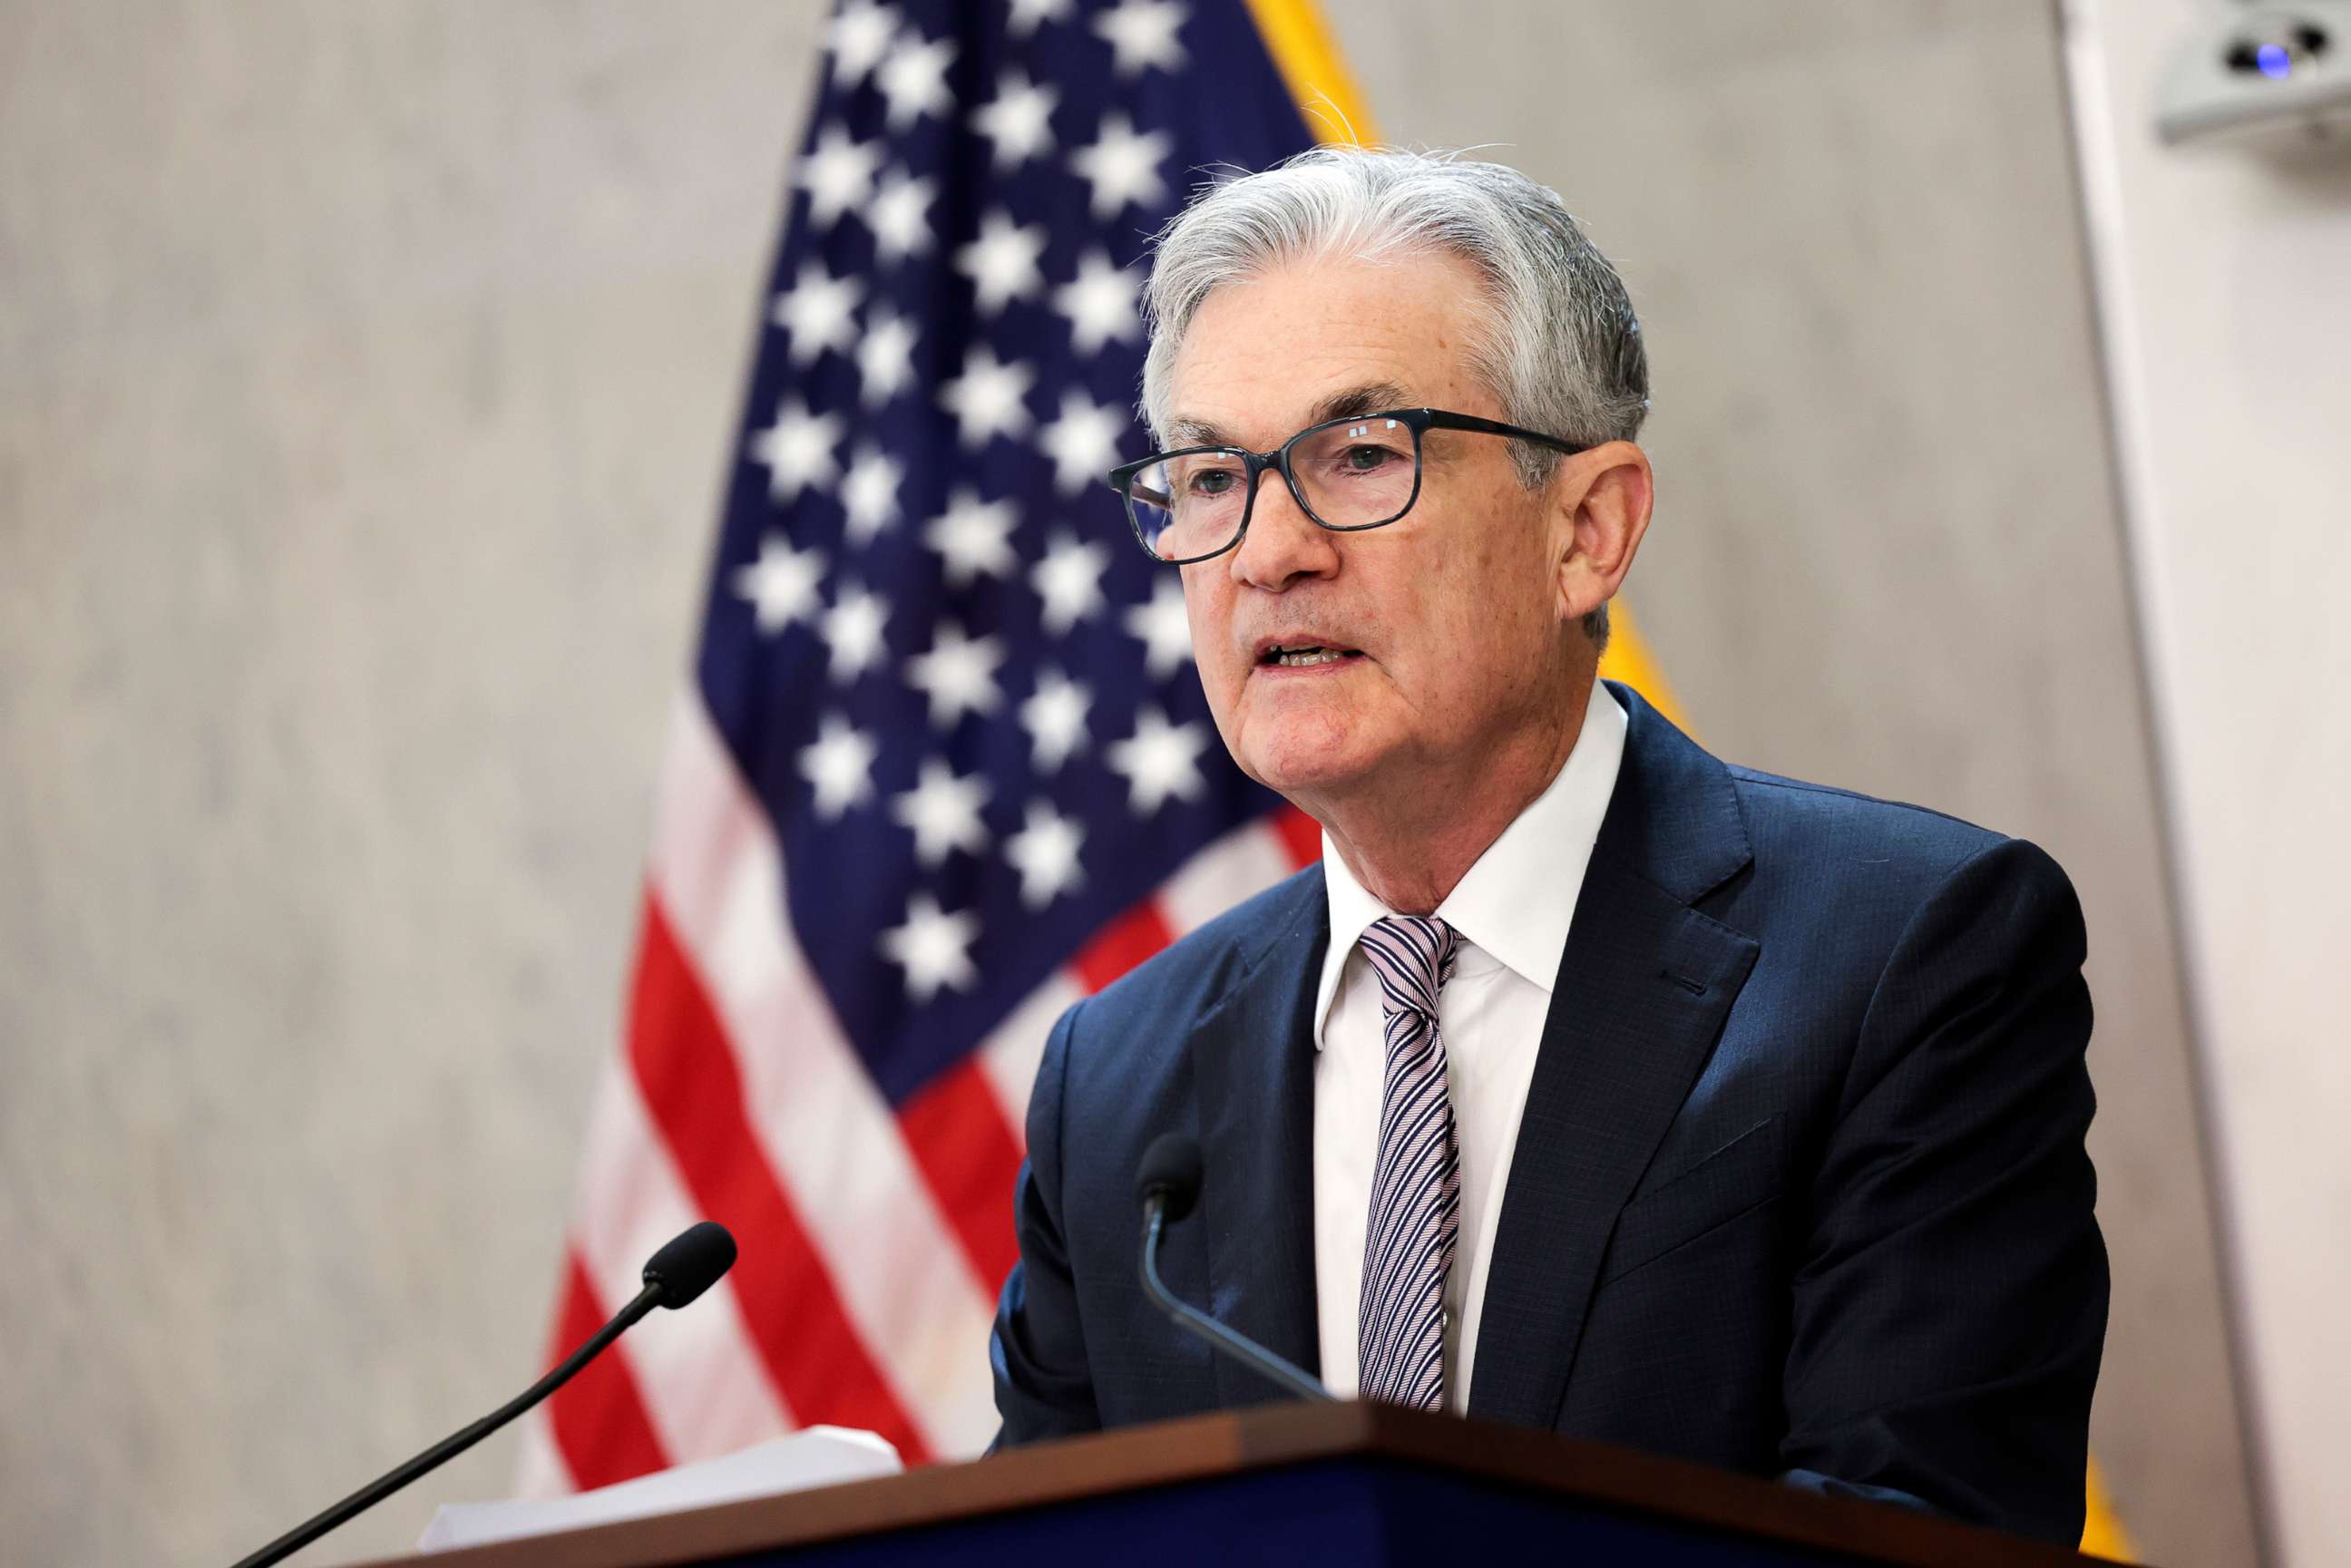 PHOTO: Federal Reserve Chairman Jerome Powell delivers remarks on June 17, 2022 in Washington, DC.